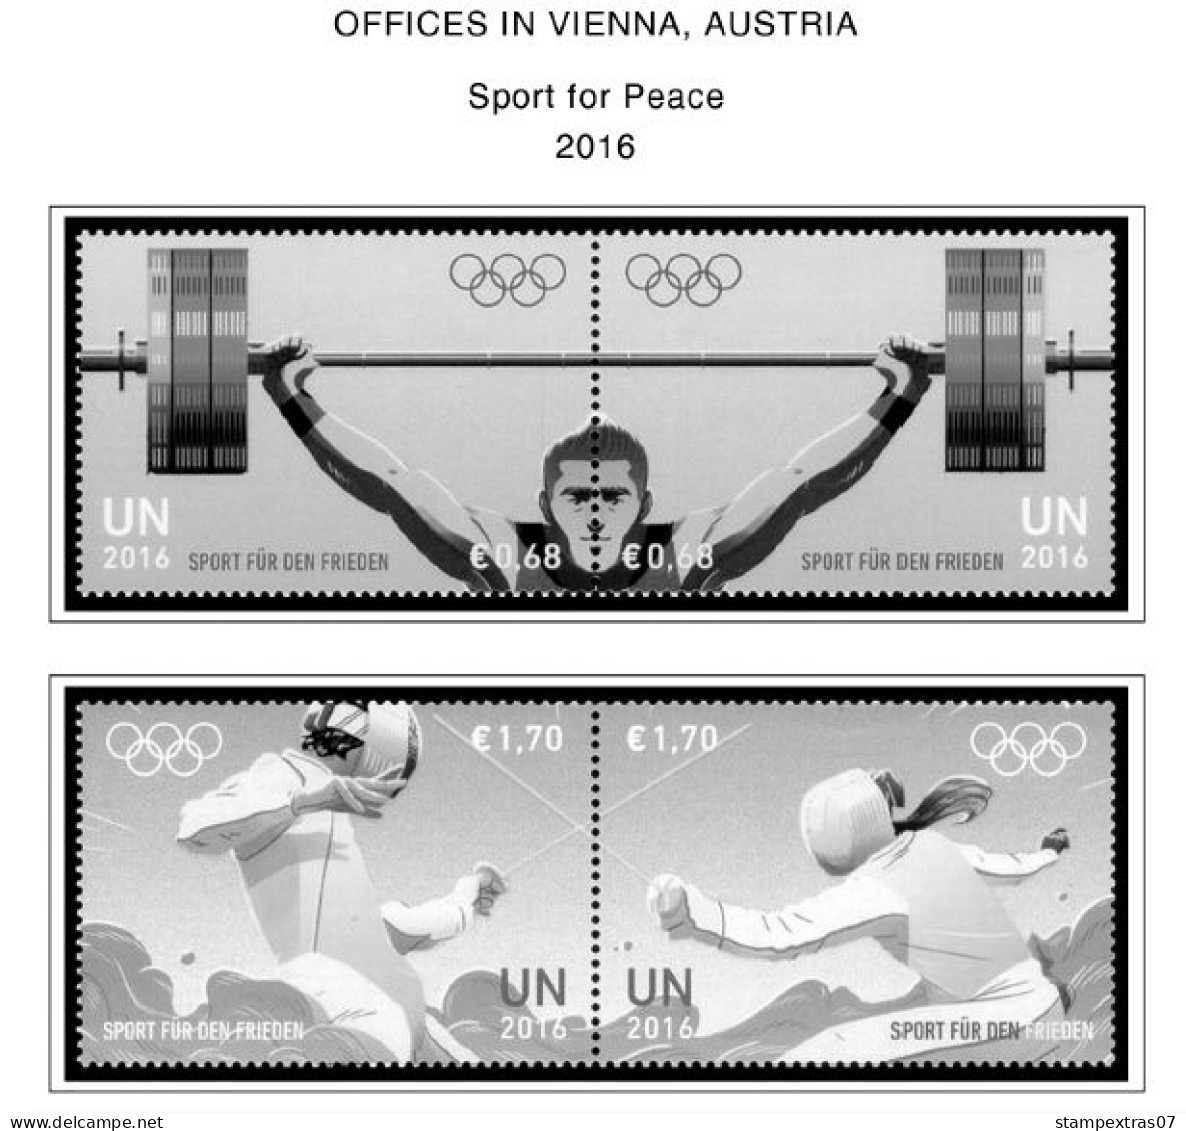 UNITED NATIONS - VIENNA 1979-2020 STAMP ALBUM PAGES (165 b&w illustrated pages)